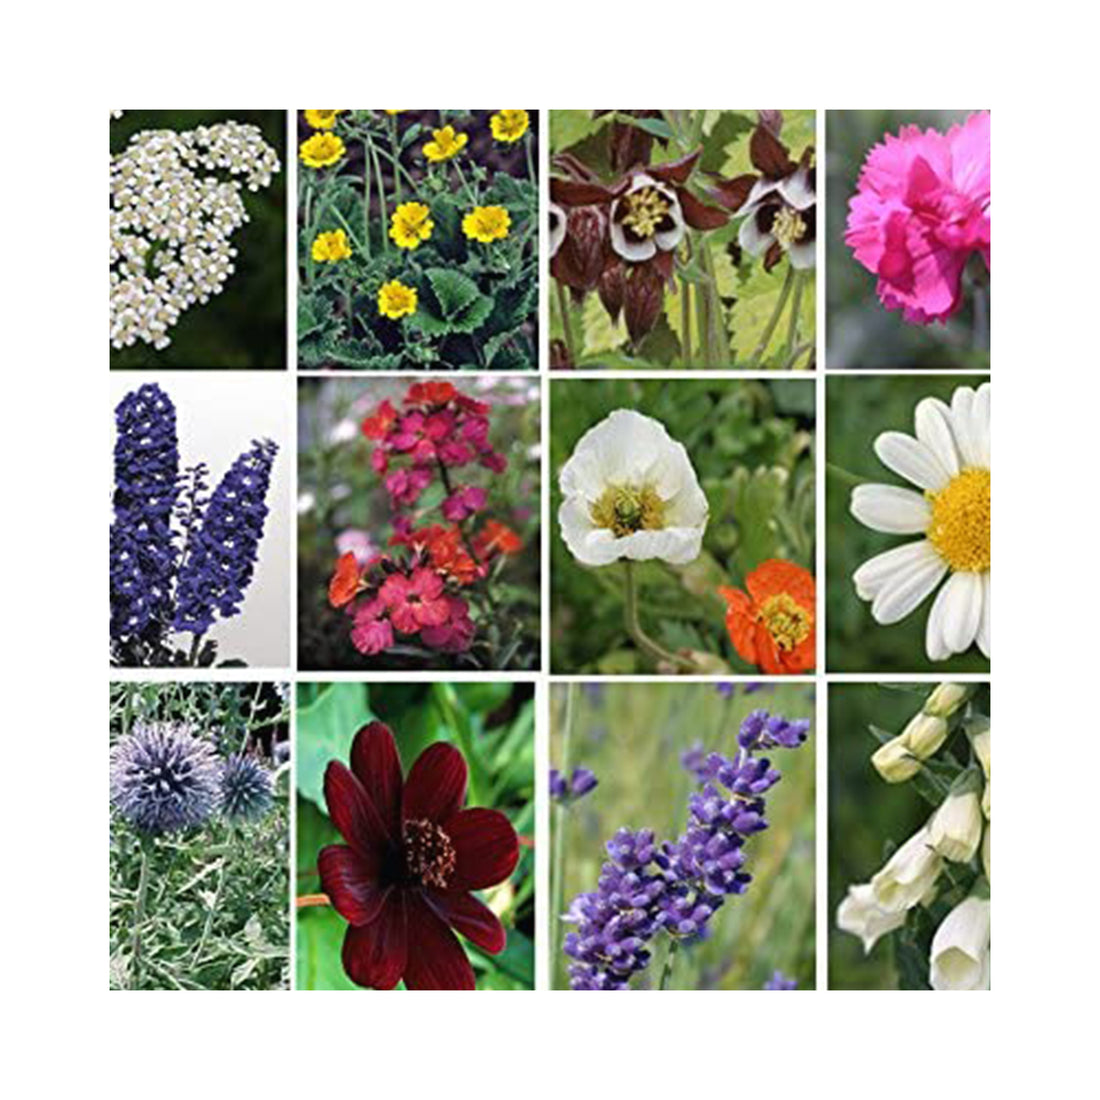 6 Pack of Hardy Outdoor Perennial Garden Plants. Jumbo Plug perennials Ready to Plant Each Variety of These Outdoor Plants are Labelled. from Newlands